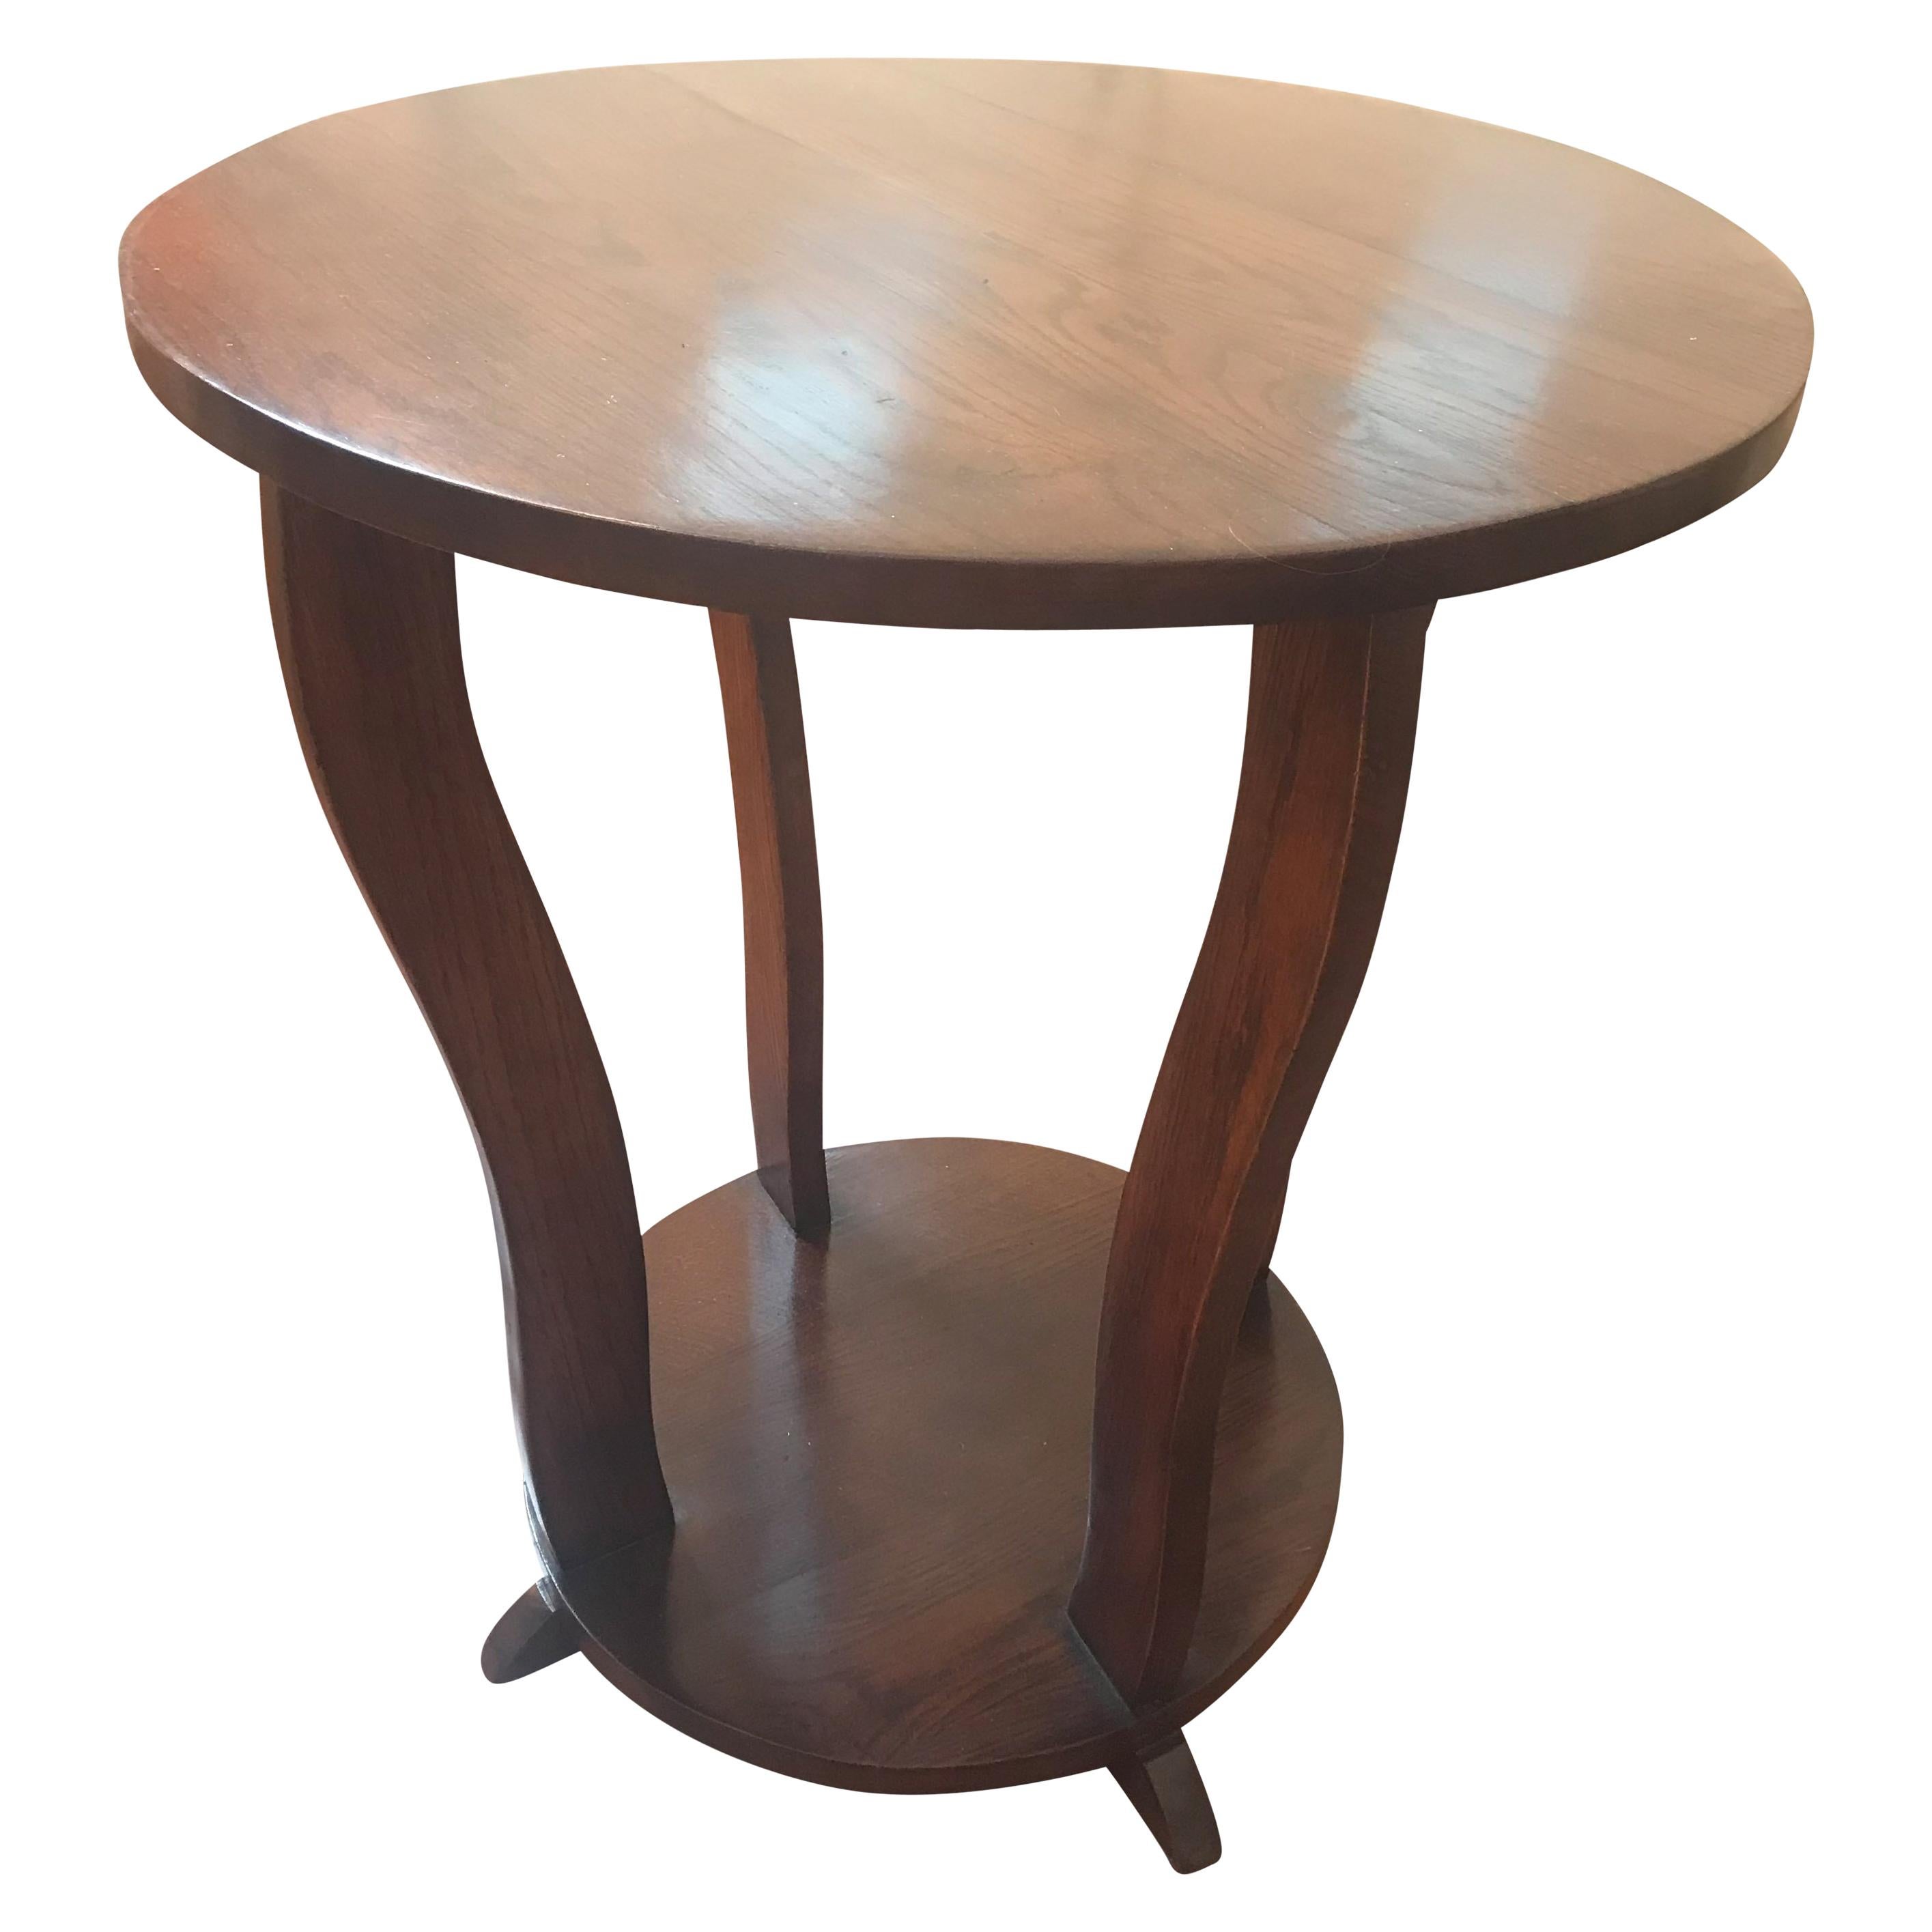 1930s Art Deco Round Table For Sale